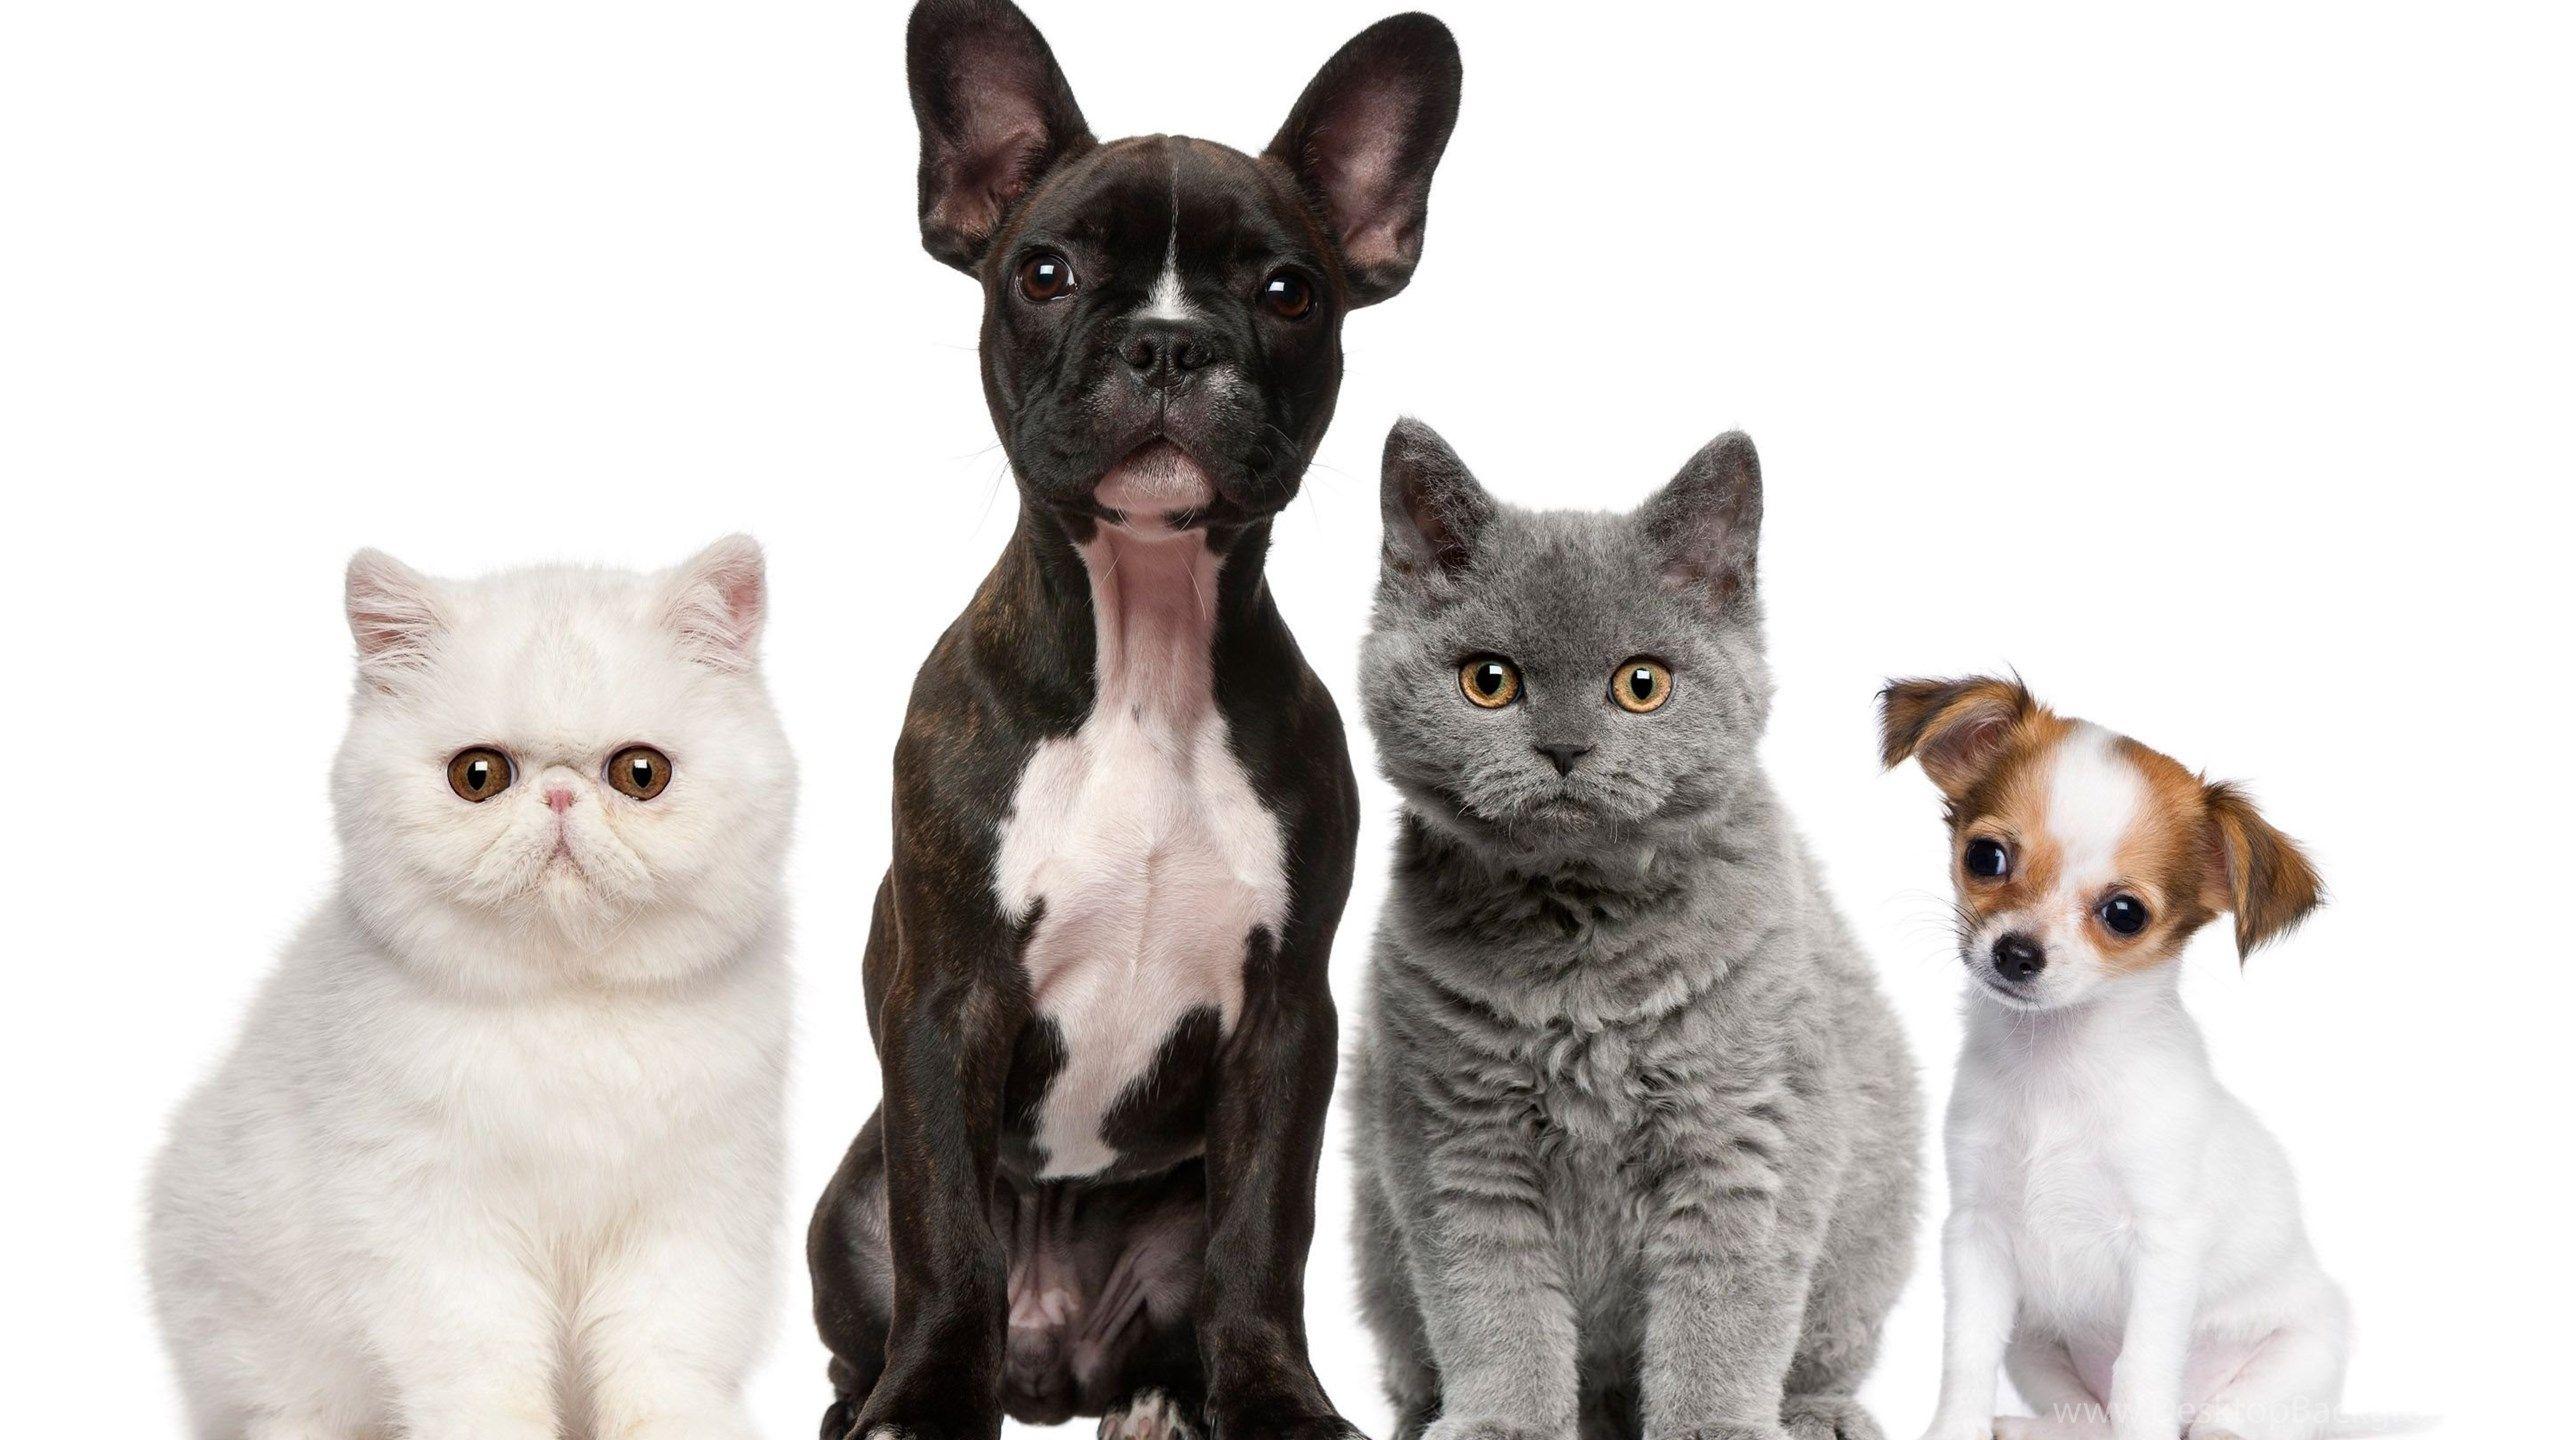 Puppy Cat Stock Photos Images and Backgrounds for Free Download